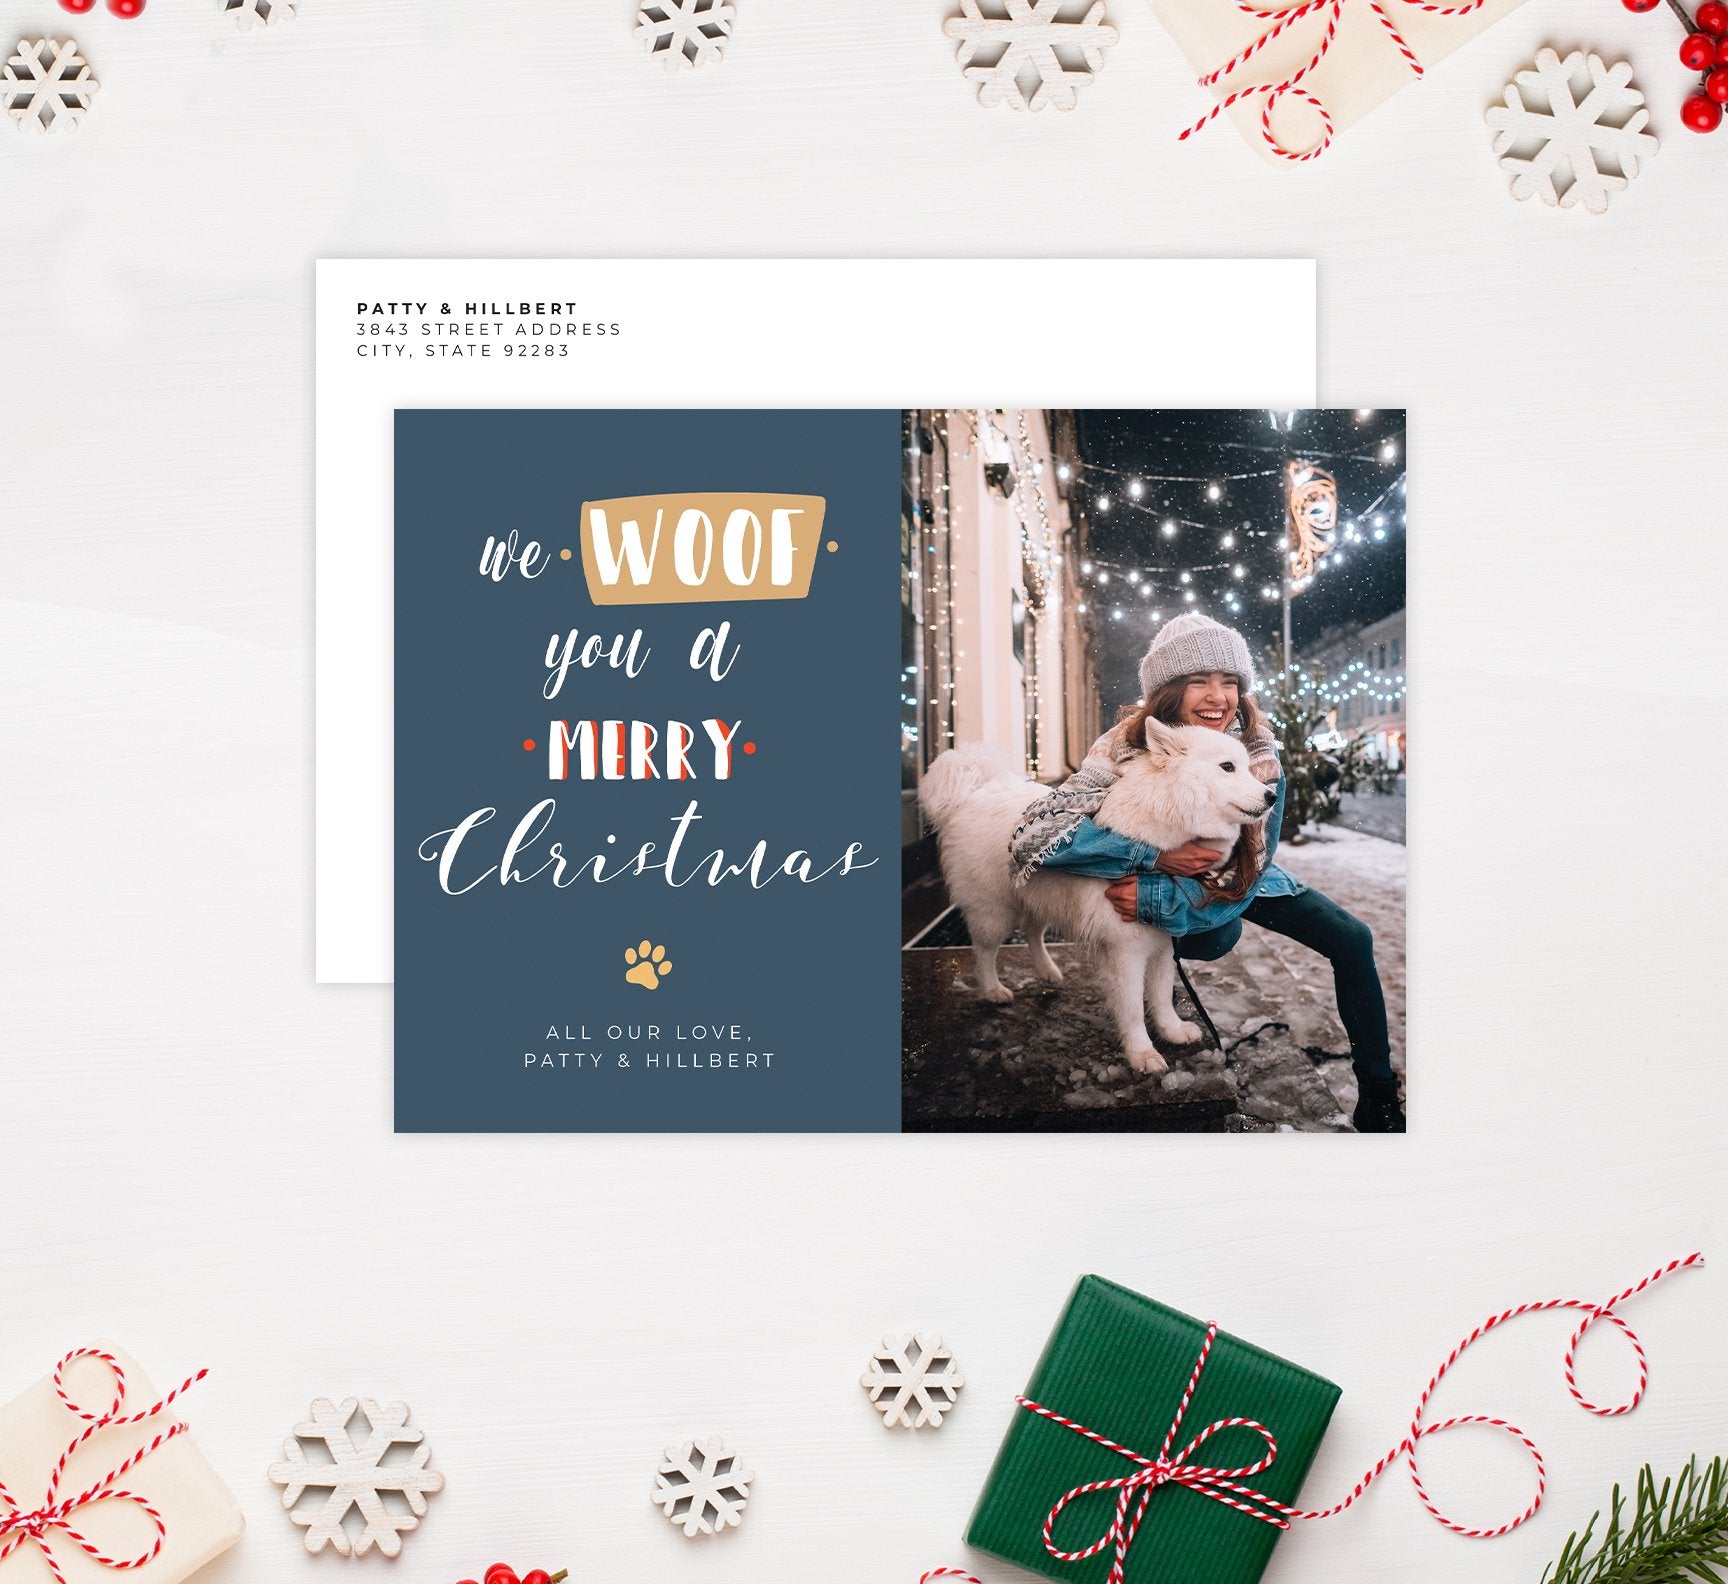 Woof Holiday Card Mockup; Holiday card with envelope and return address printed on it. 